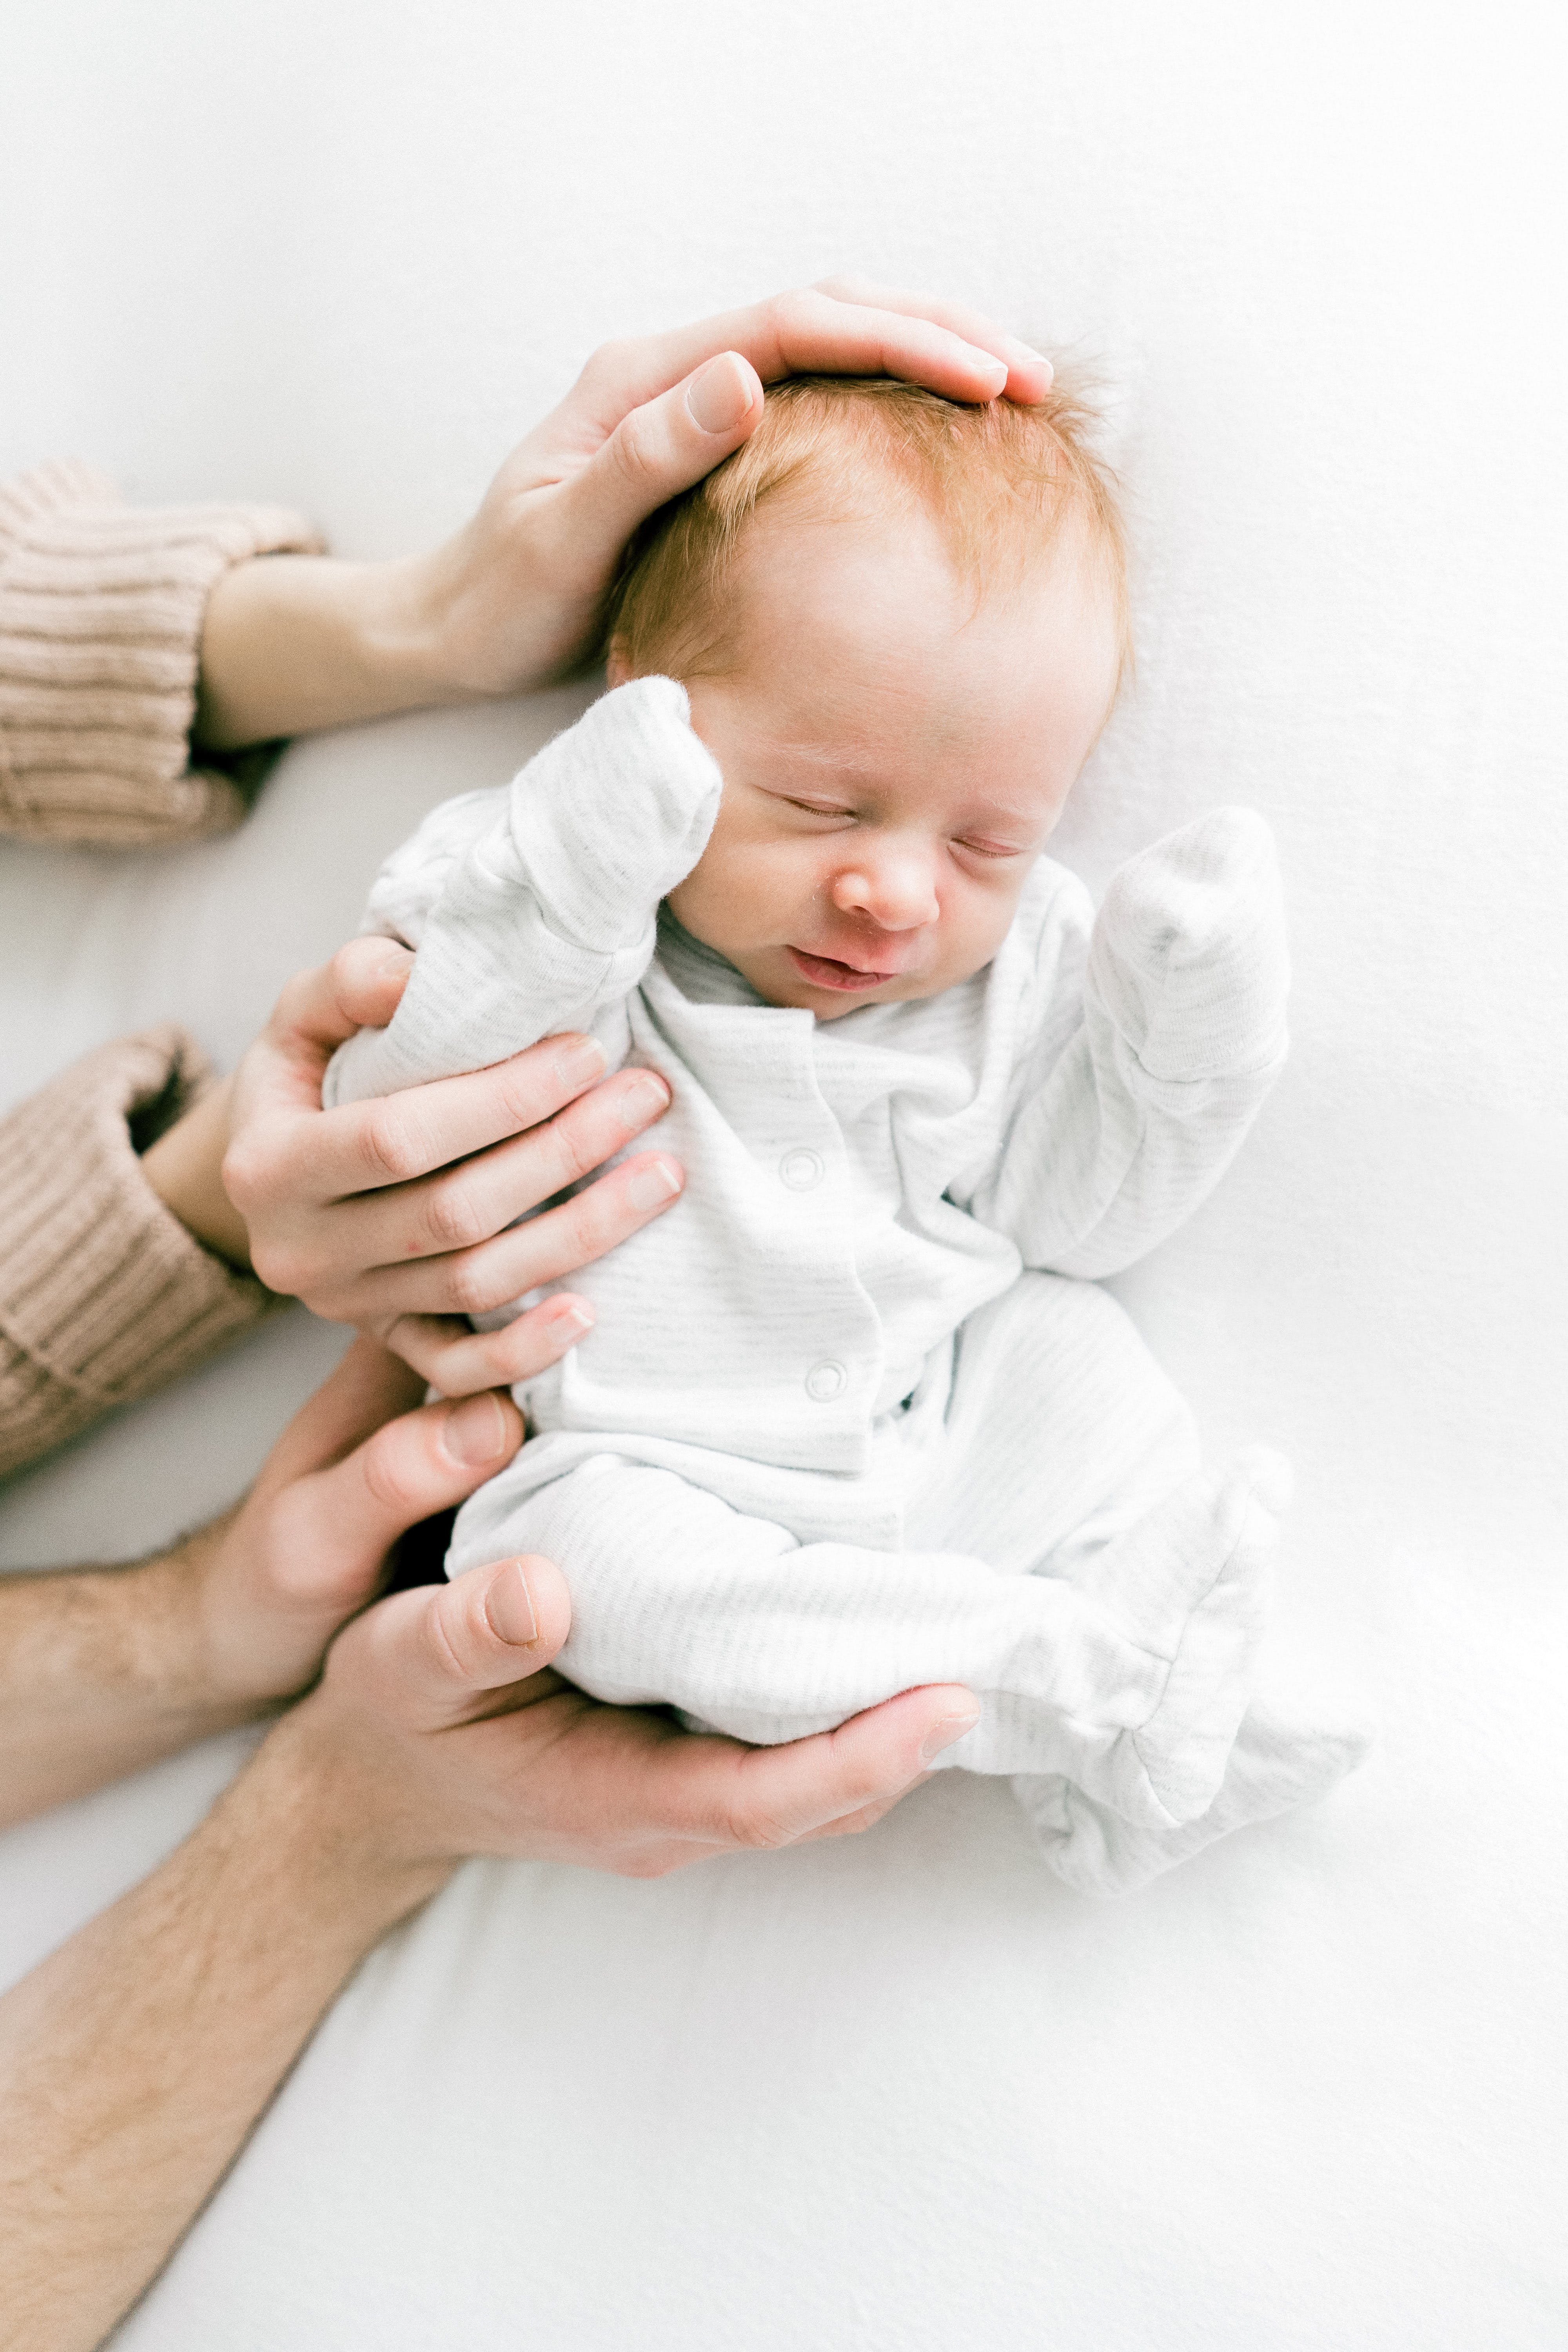 Hands holding a little baby | Source: Pexels